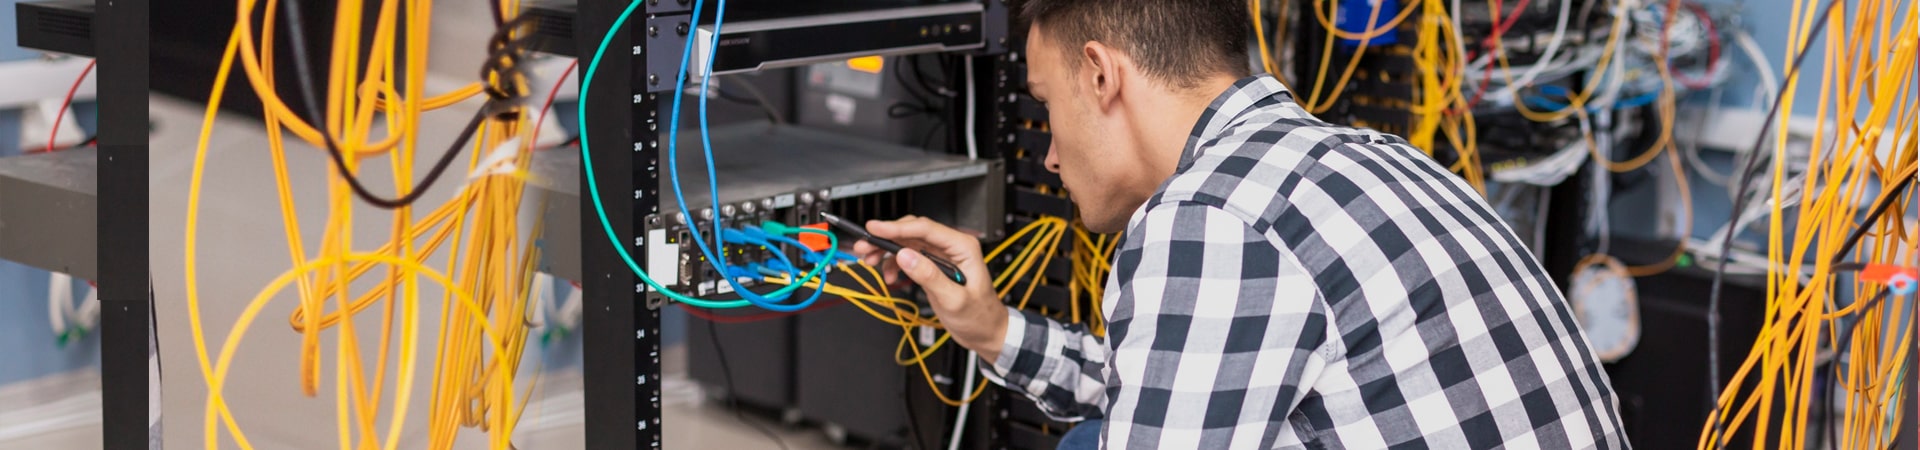 IT & Networking Installation & Maintenance Services